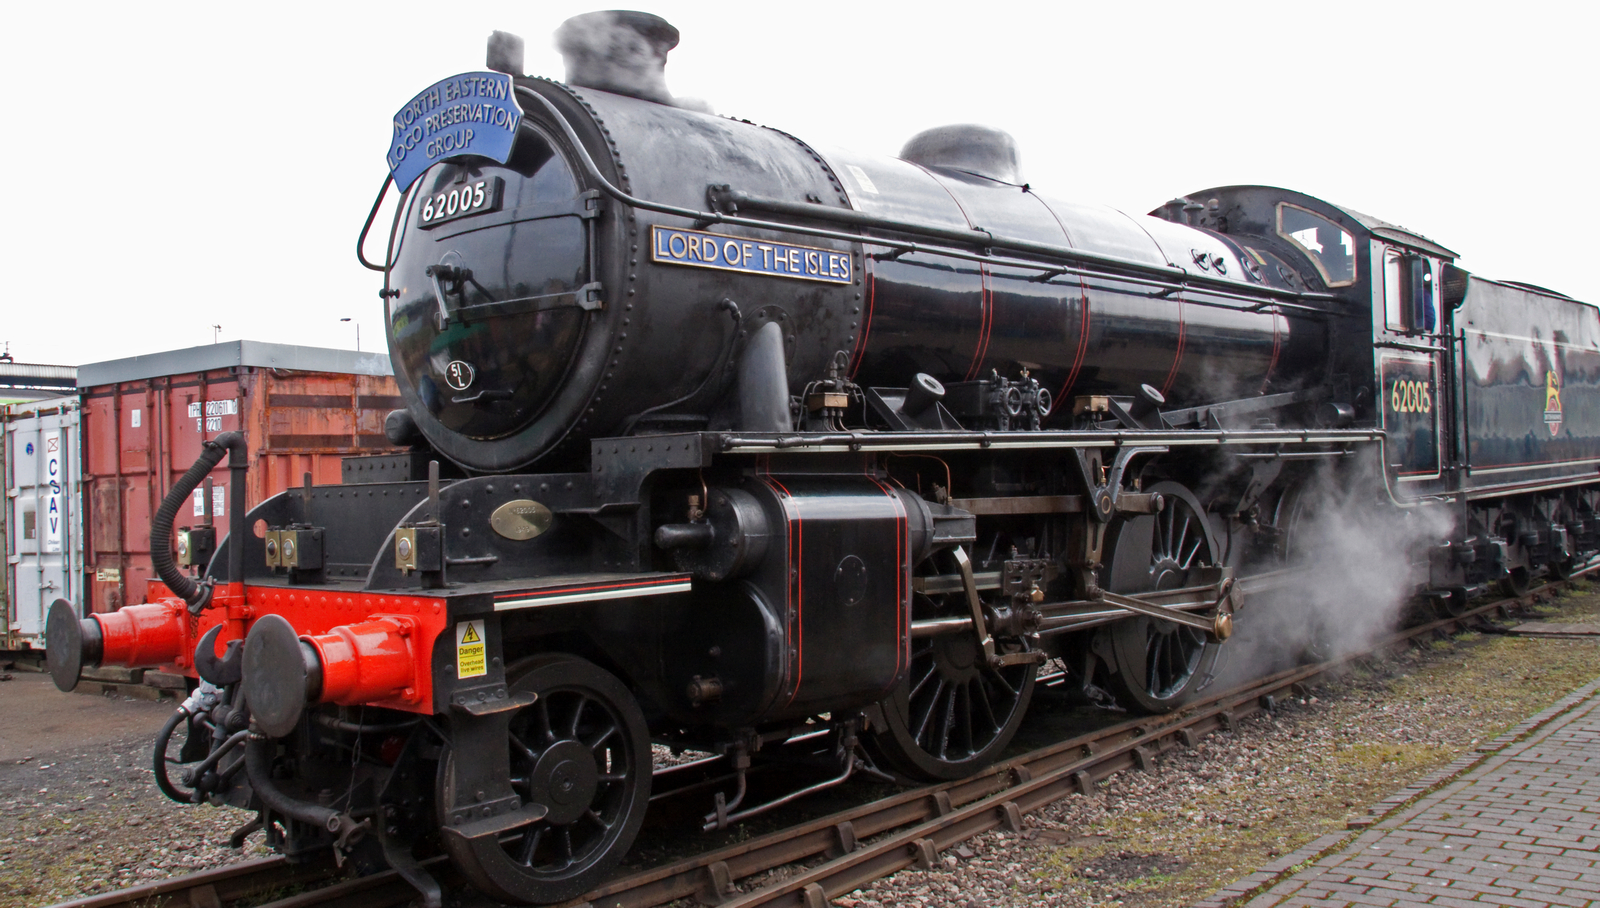 No. 62005 “Lord of the Isles” in Tyseley in April 2009